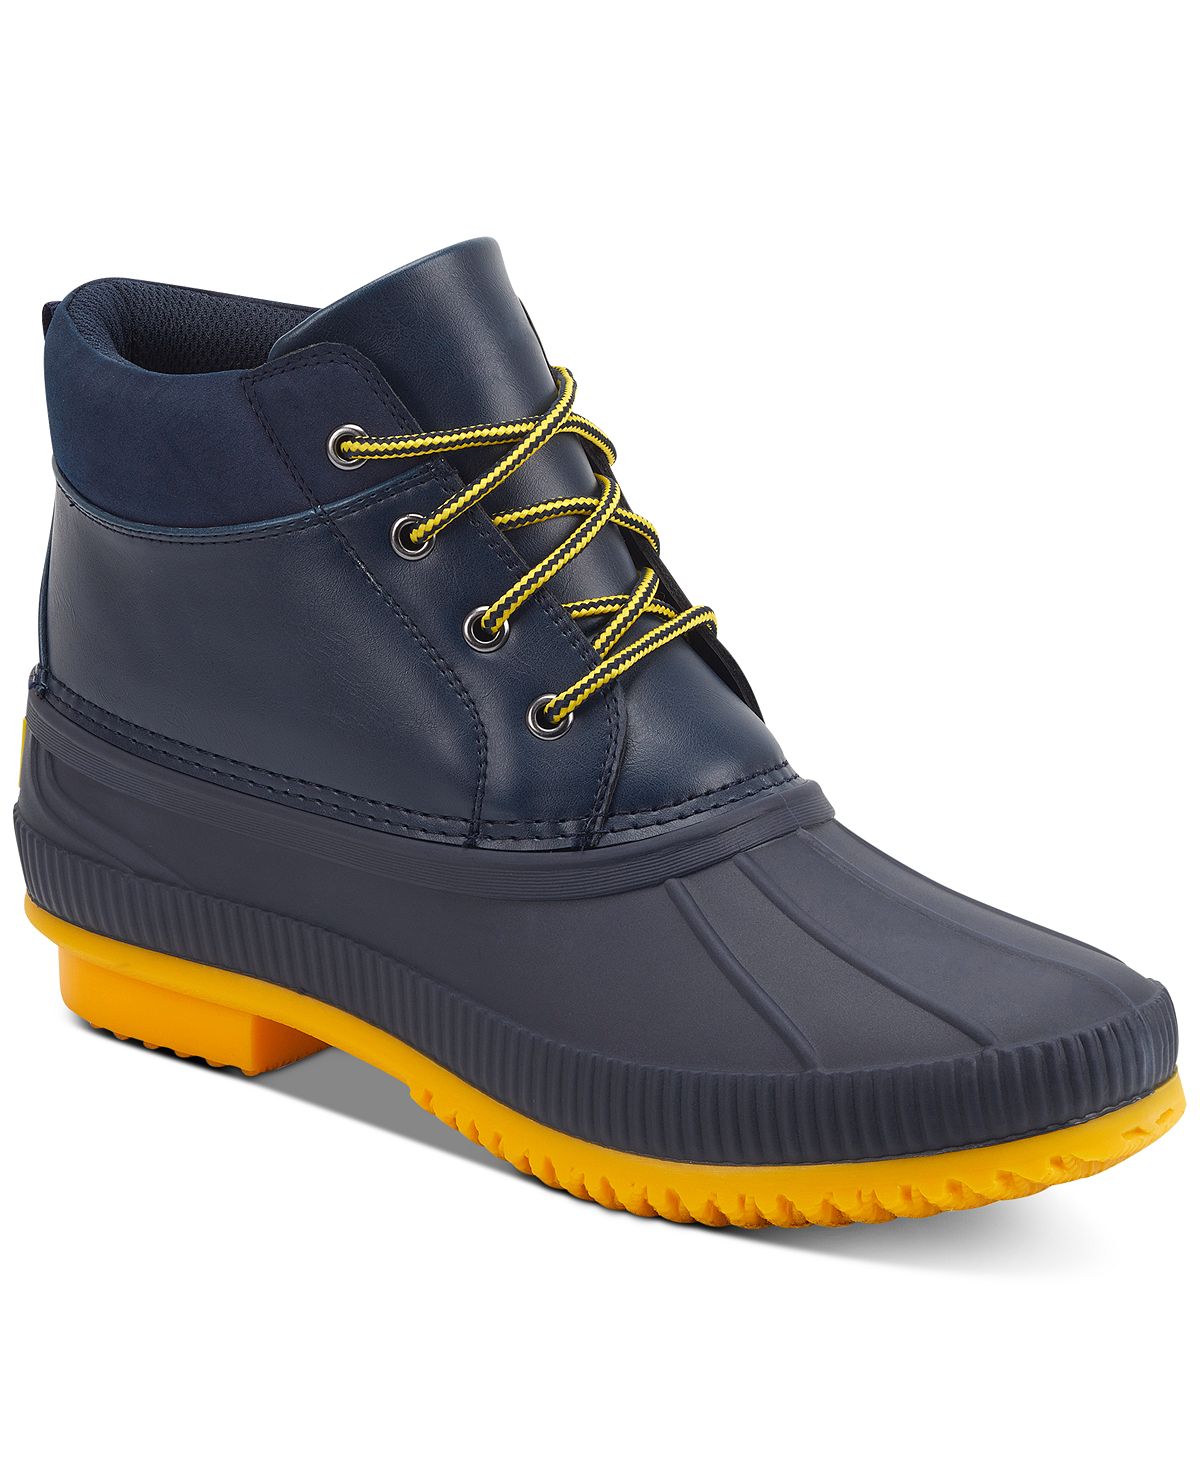 Tommy Hilfiger Celcius Duck Boots Navy Yellow